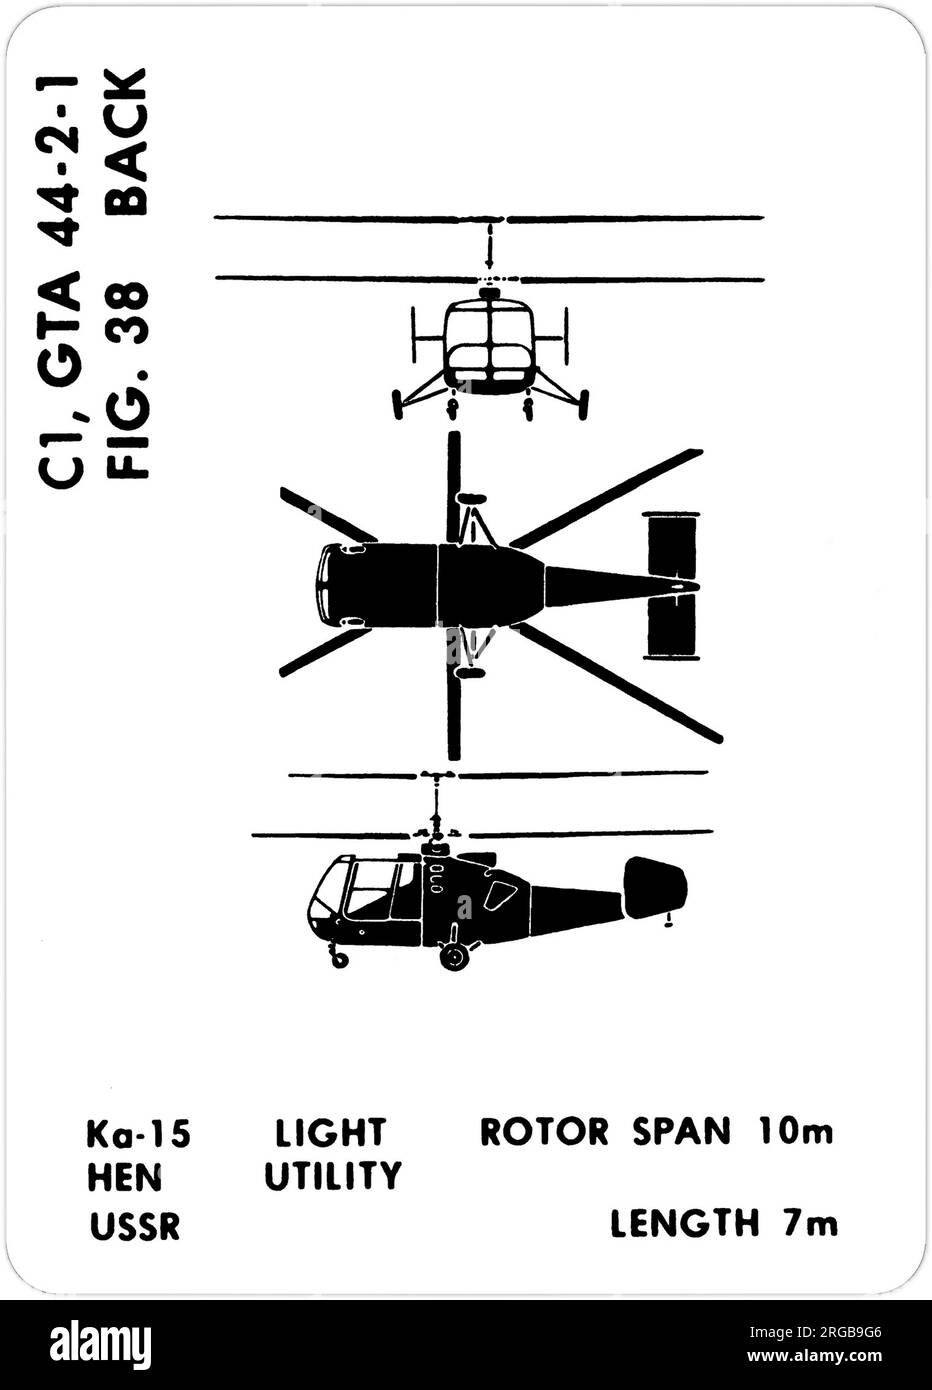 Kamov Ka-15 (NATO codename: Hen). This is one of the series of Graphics Training Aids (GTA) used by the United States Army to train their personnel to recognize friendly and hostile aircraft. This particular set, GTA 44-2-1, was issued in July1977. The set features aircraft from: Canada, Italy, United Kingdom, United States, and the USSR. Stock Photo